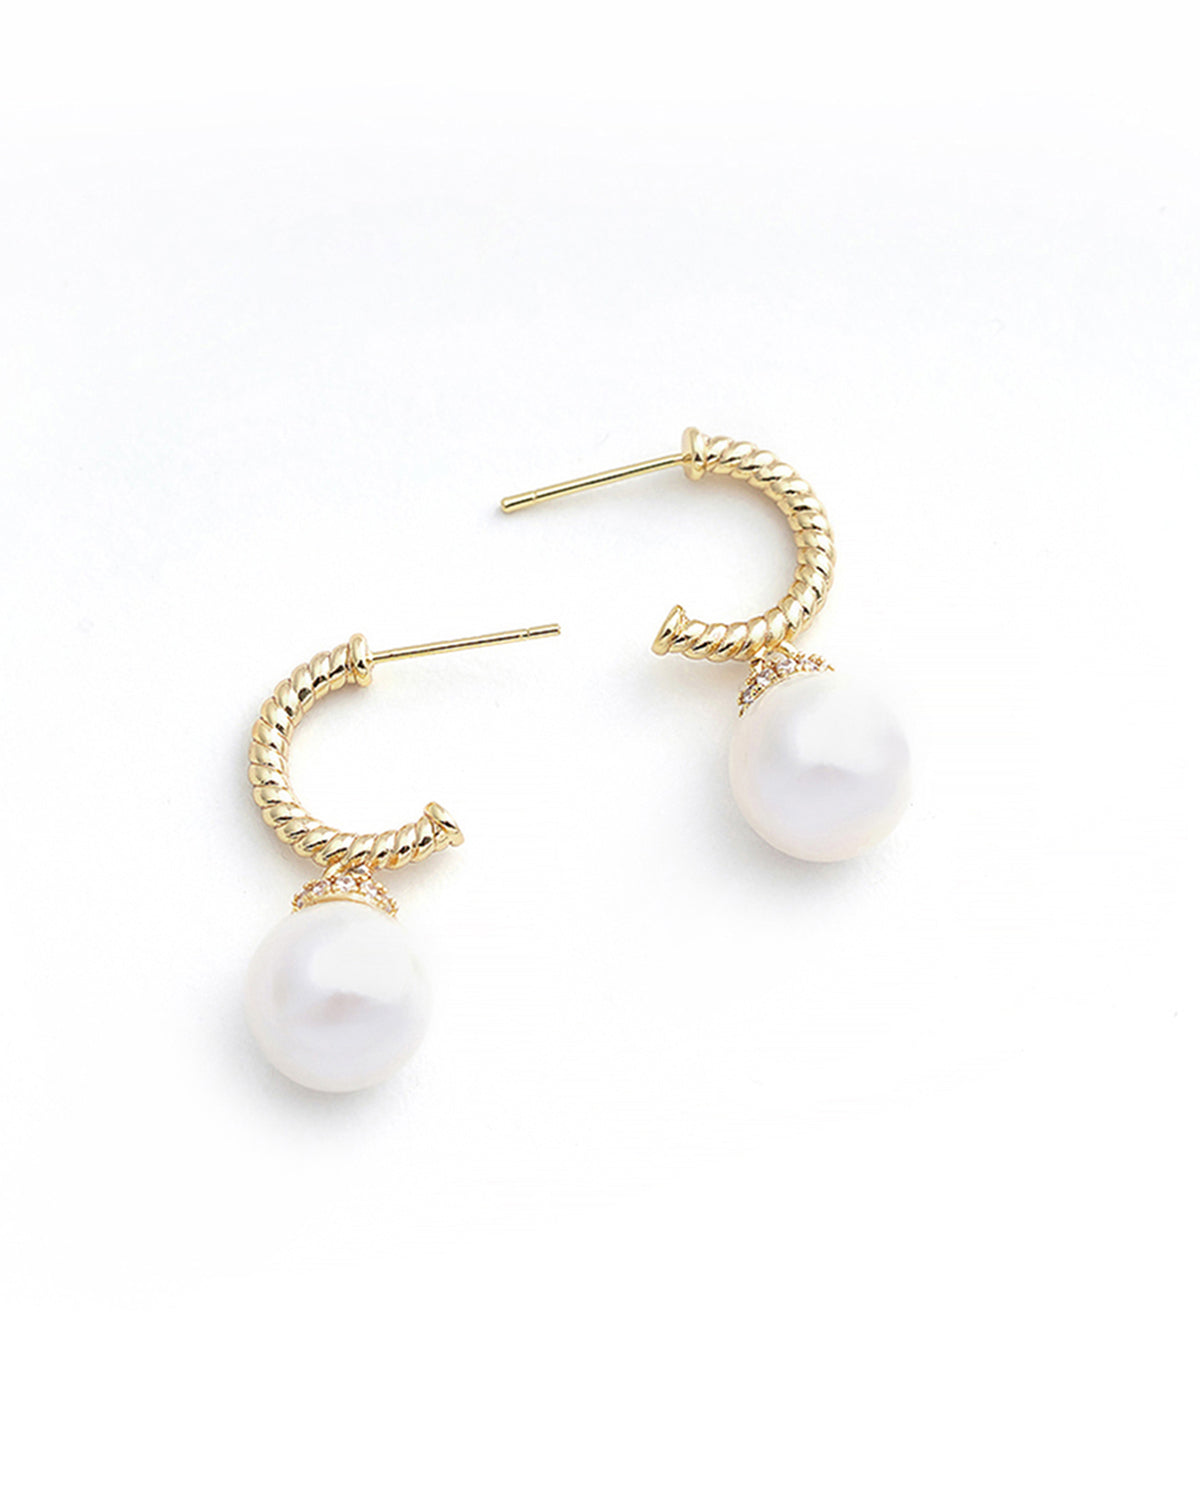 10-11mm Artificially Cultured Round Freshwater Pearl Rattan Pattern Crystal Drop Earrings